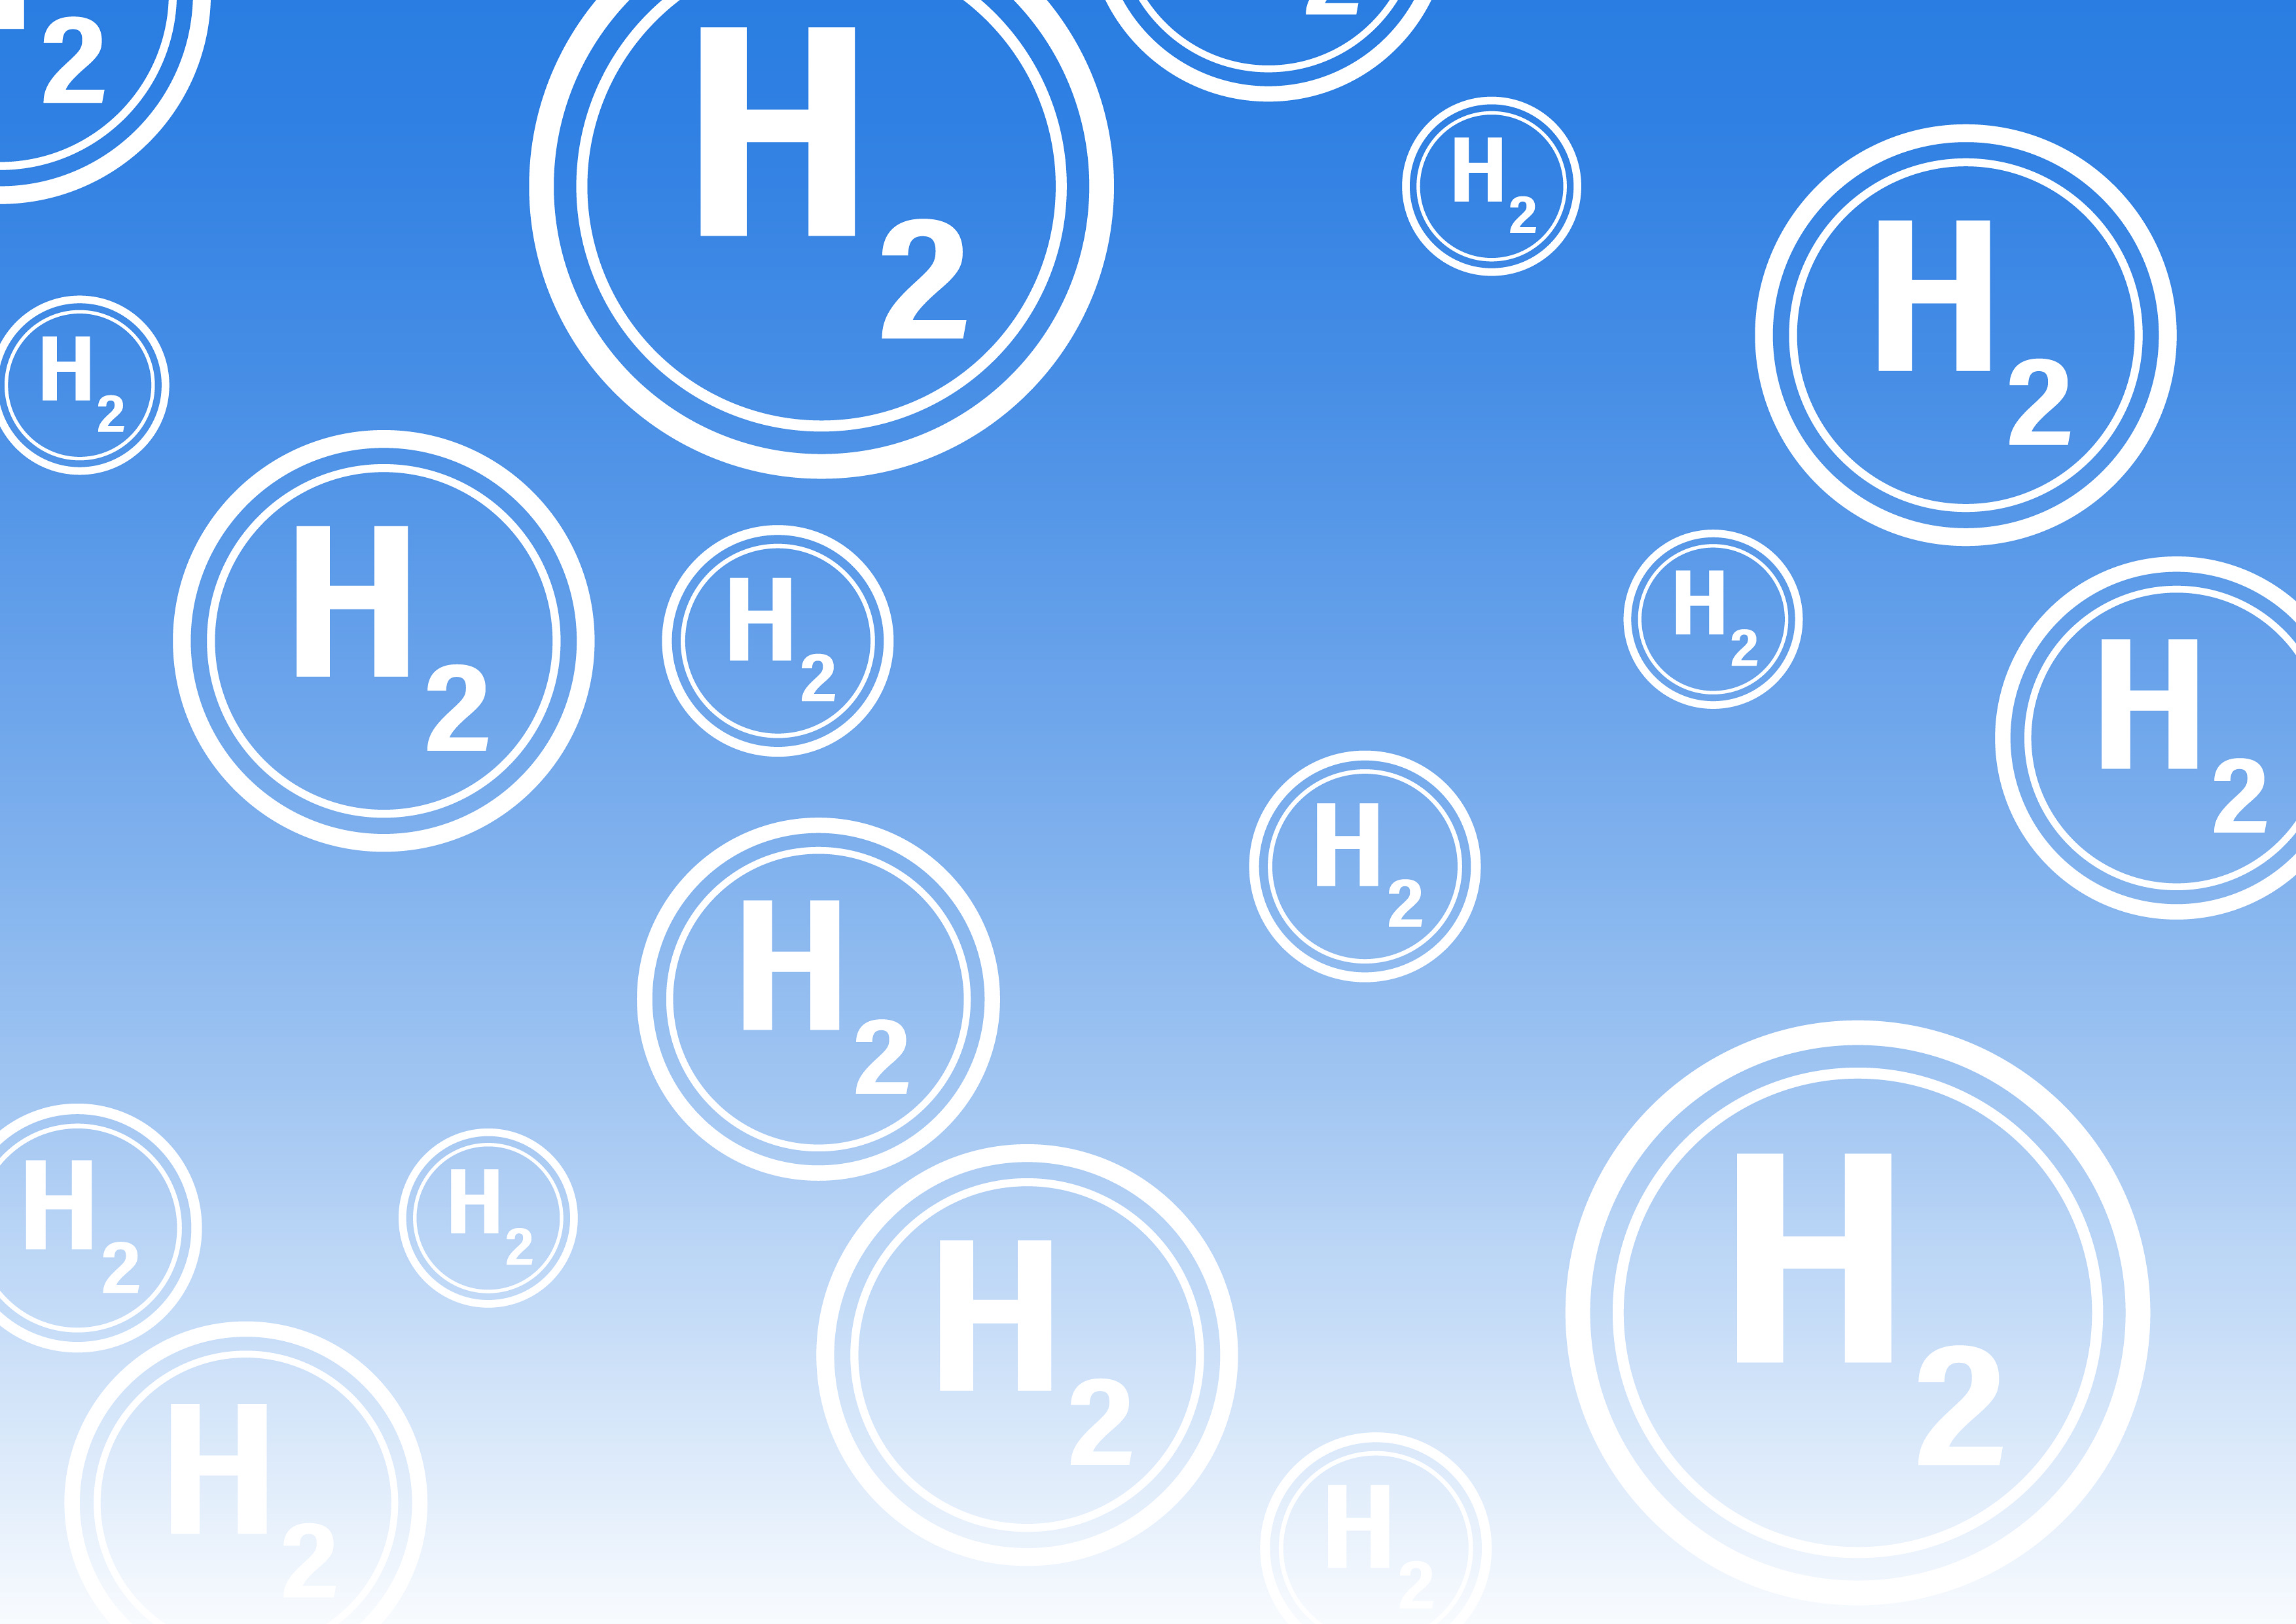 • Image symbolising hydrogen (H2): circles in different sizes, each surrounding the chemical molecular formula of hydrogen, H2